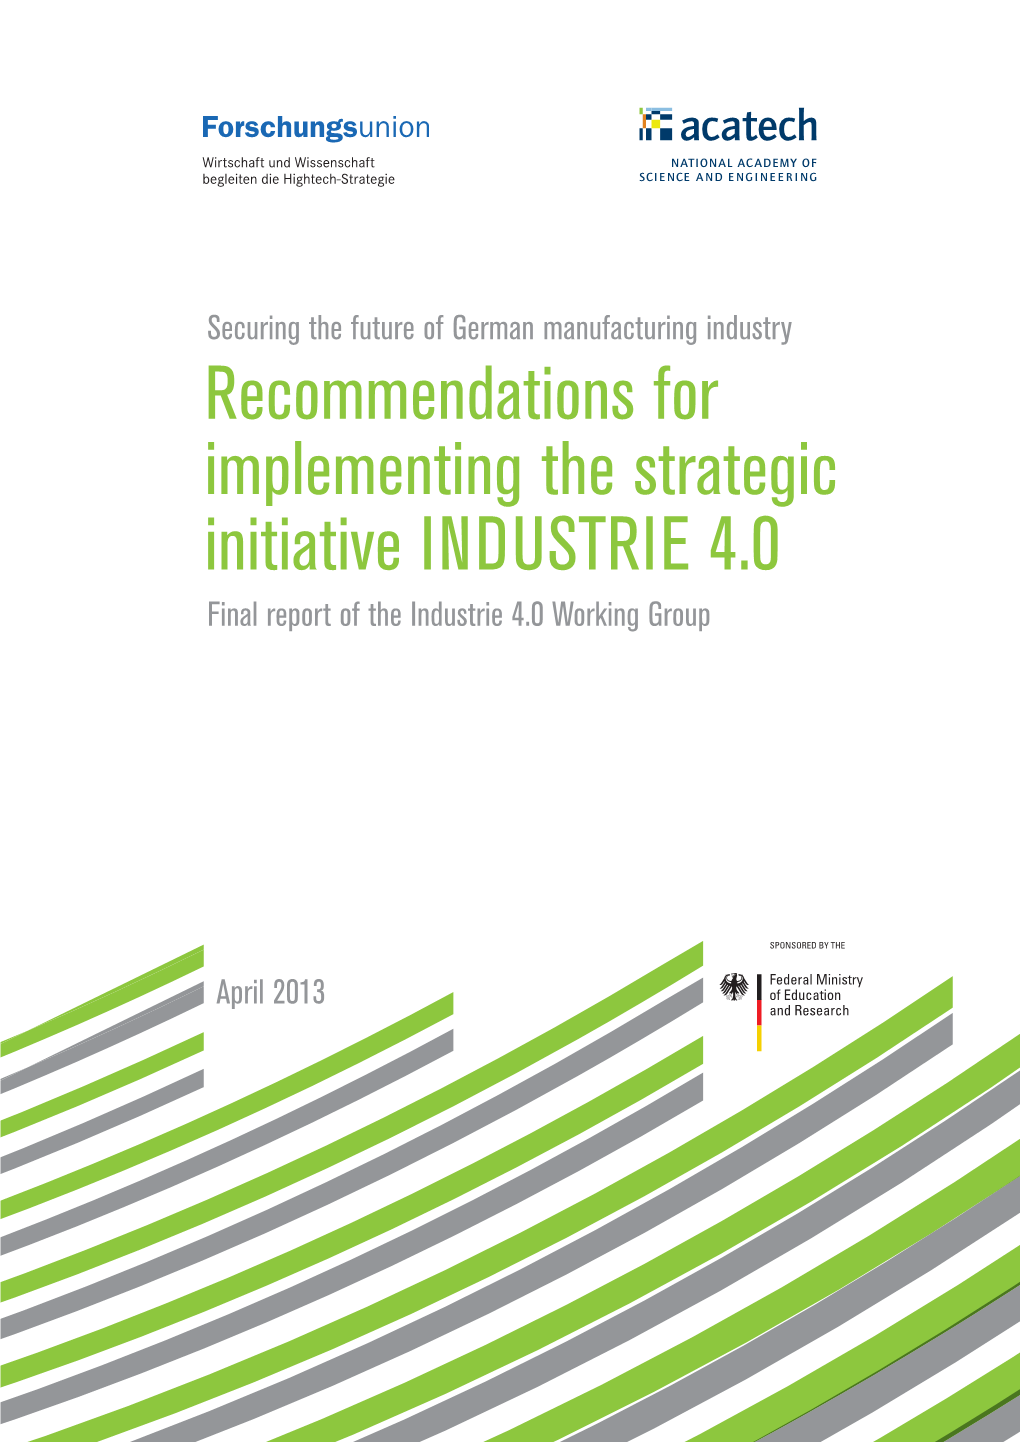 Recommendations for Implementing the Strategic Initiative INDUSTRIE 4.0 Final Report of the Industrie 4.0 Working Group